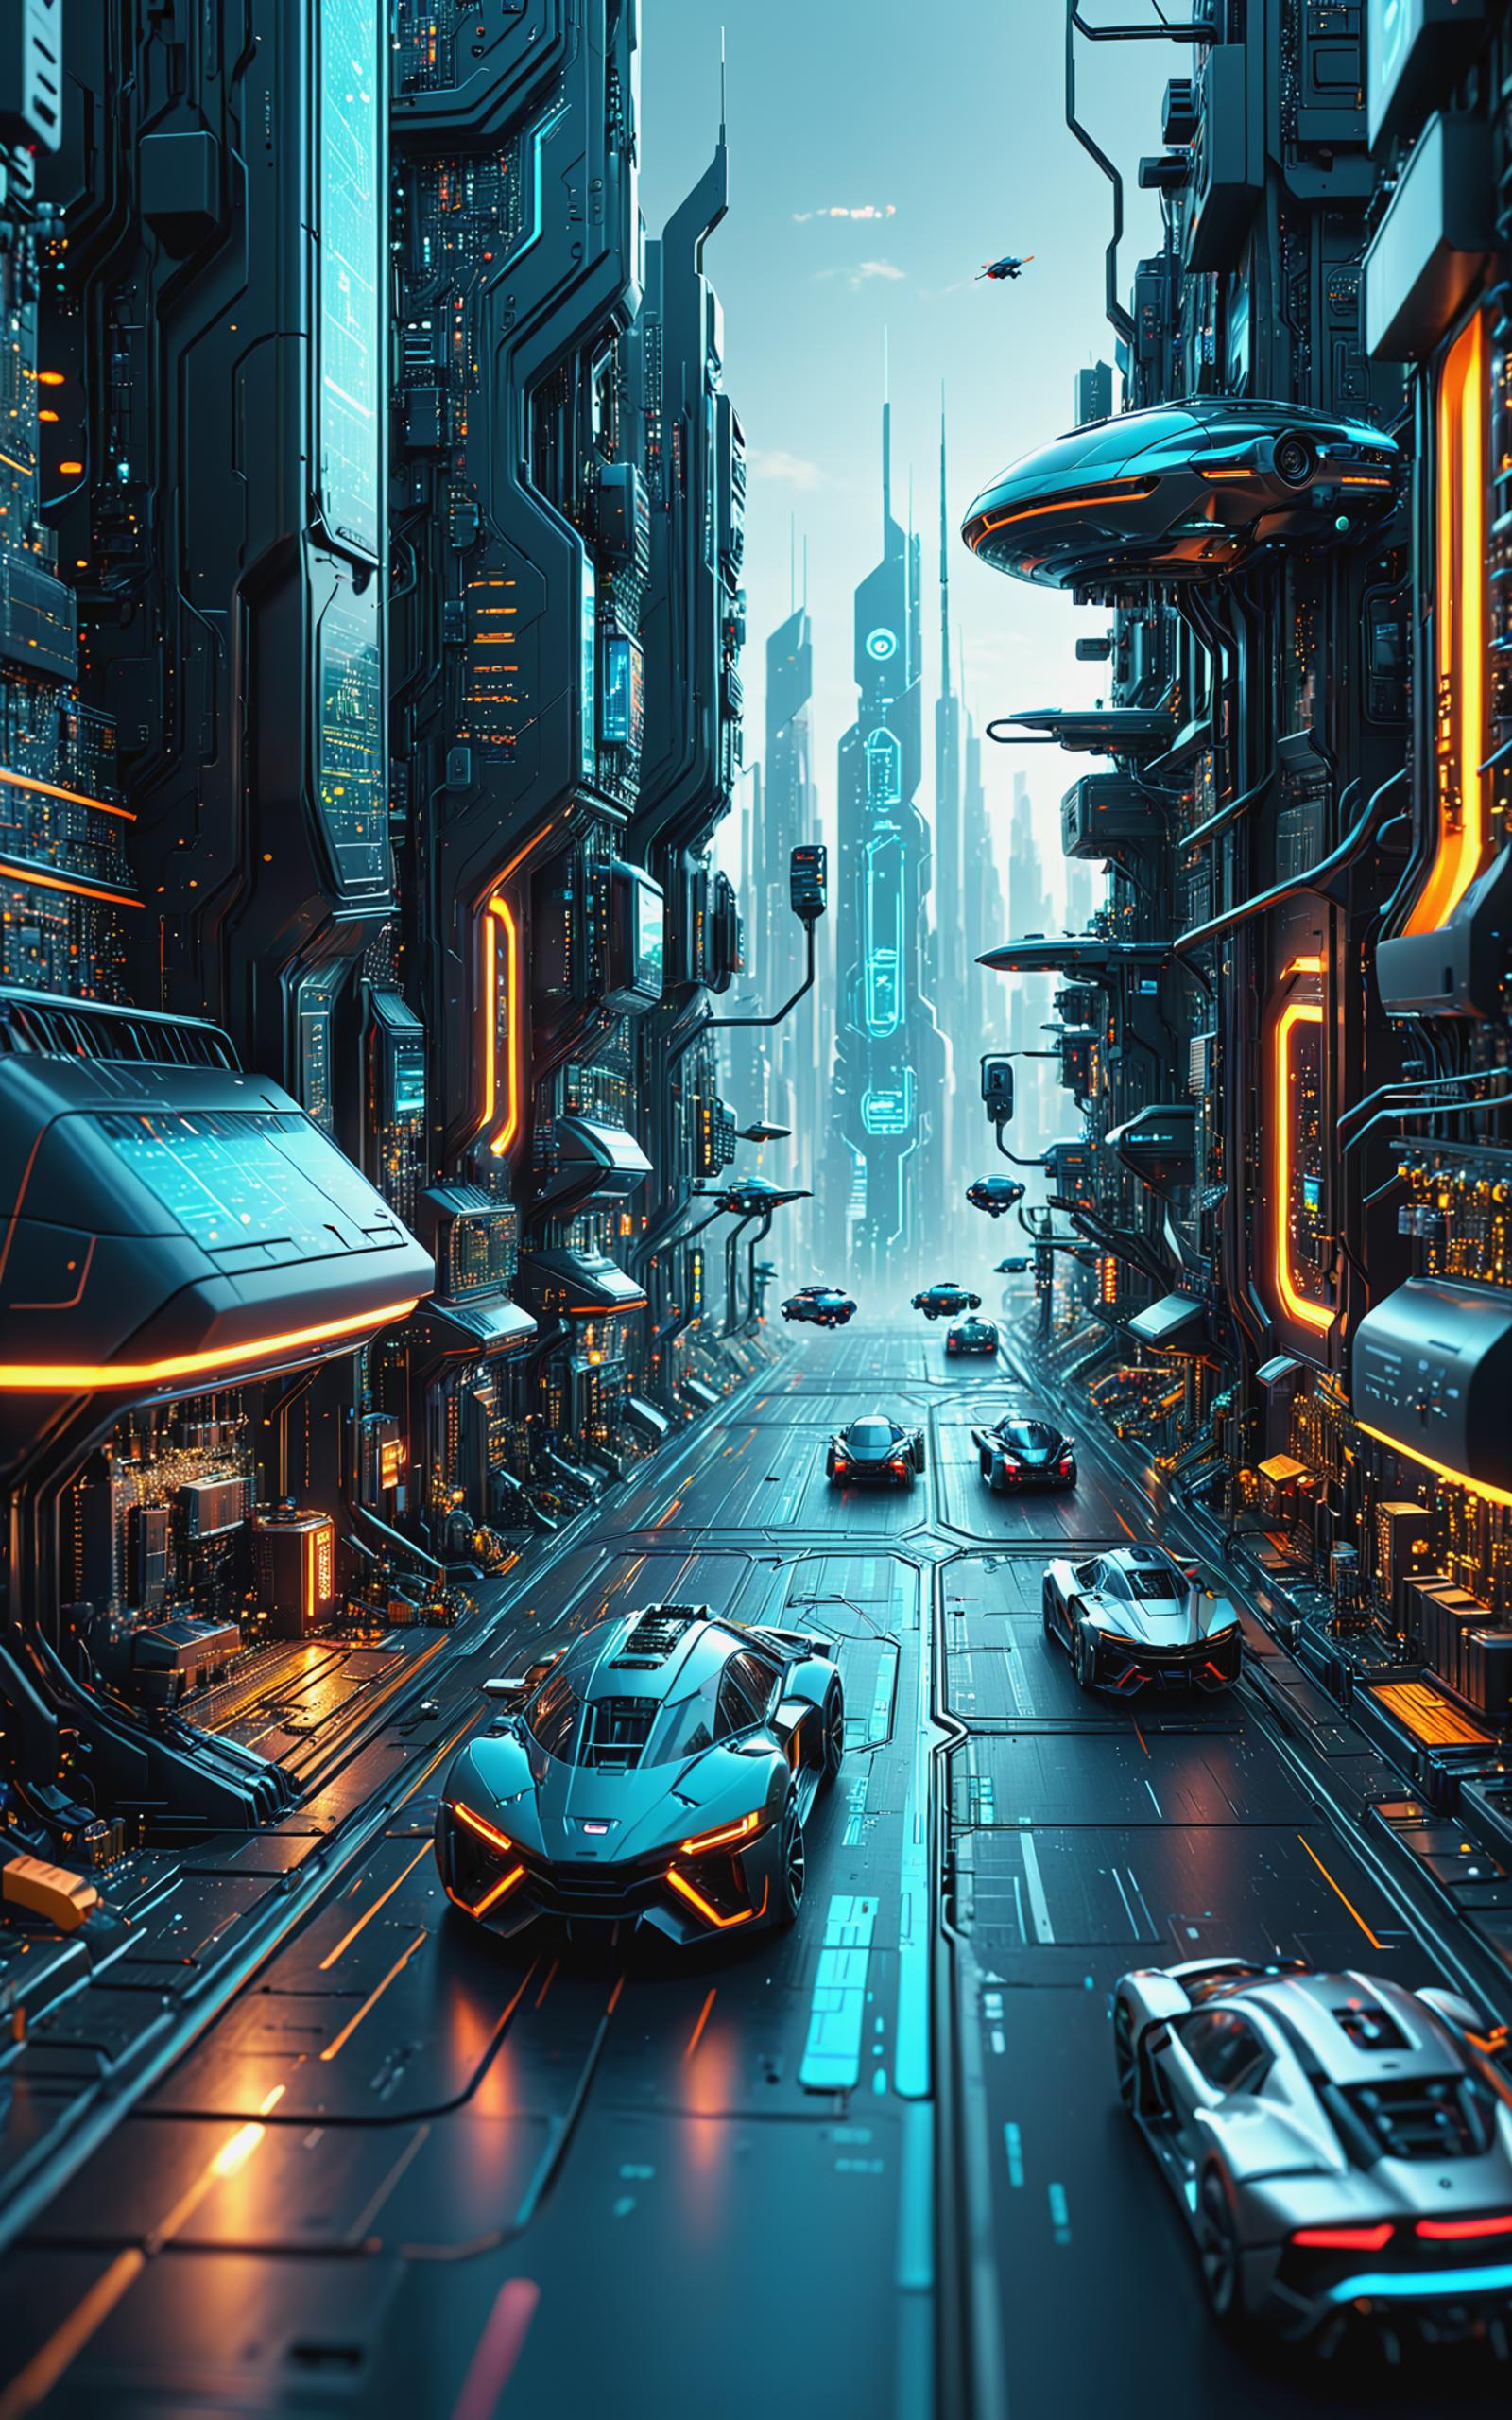 Futuristic Cityscape with Neon Lights and Vehicles on Blue Road